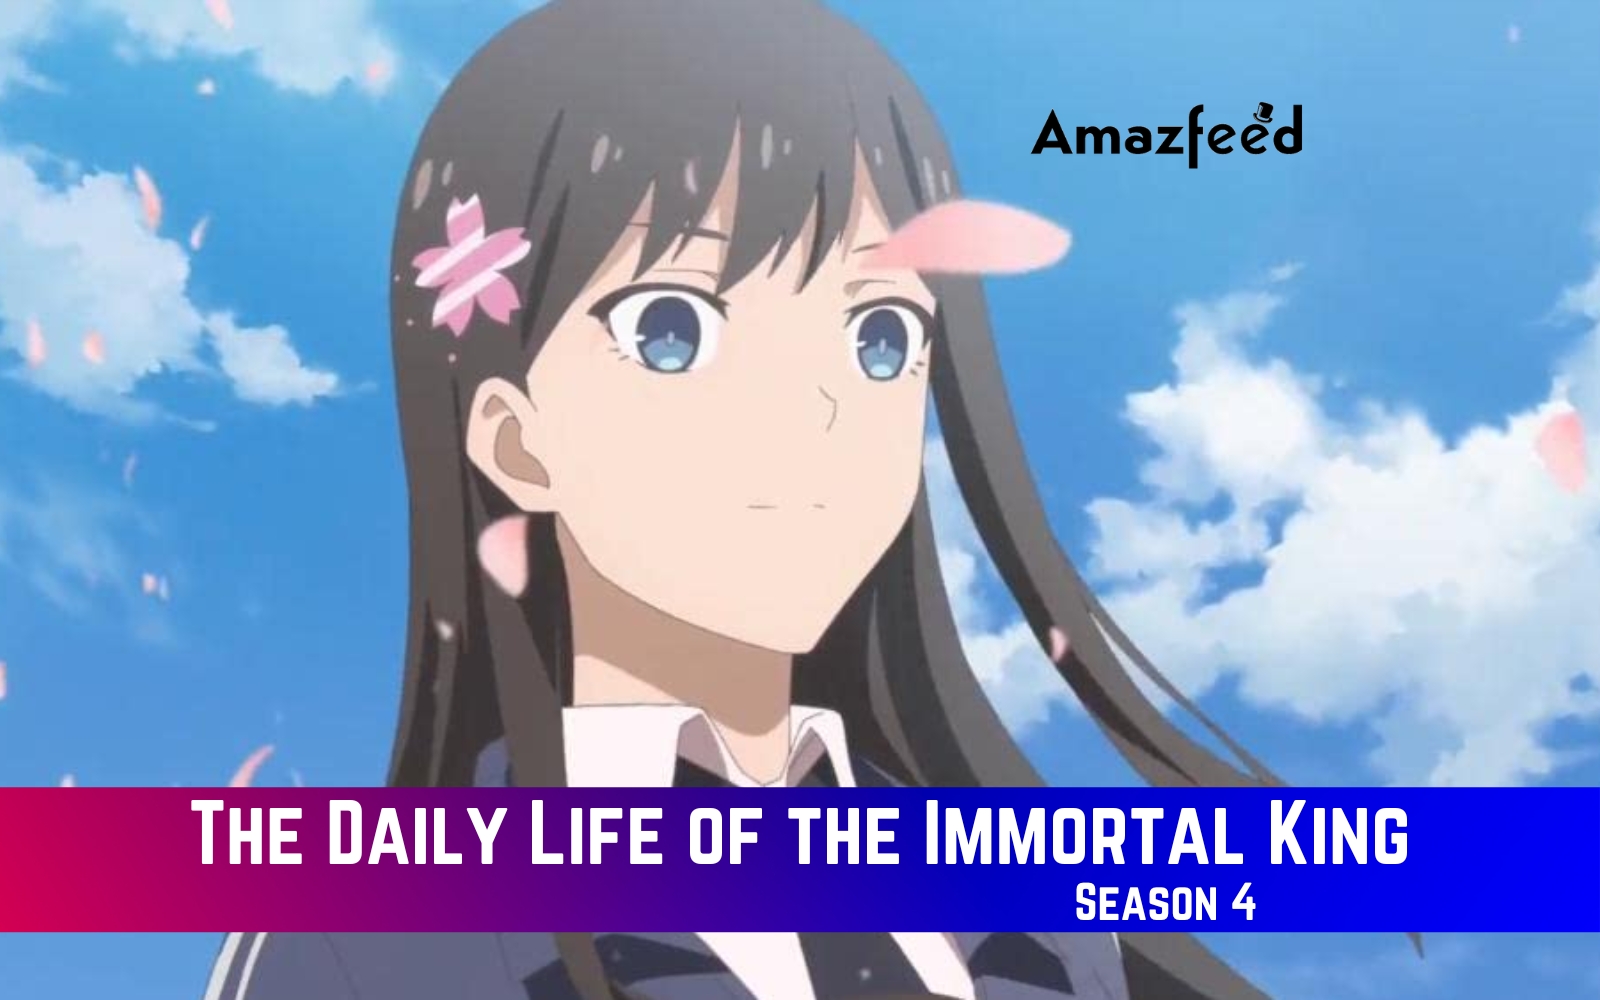 the daily life of the immortal king overpowered moments season 4#theda